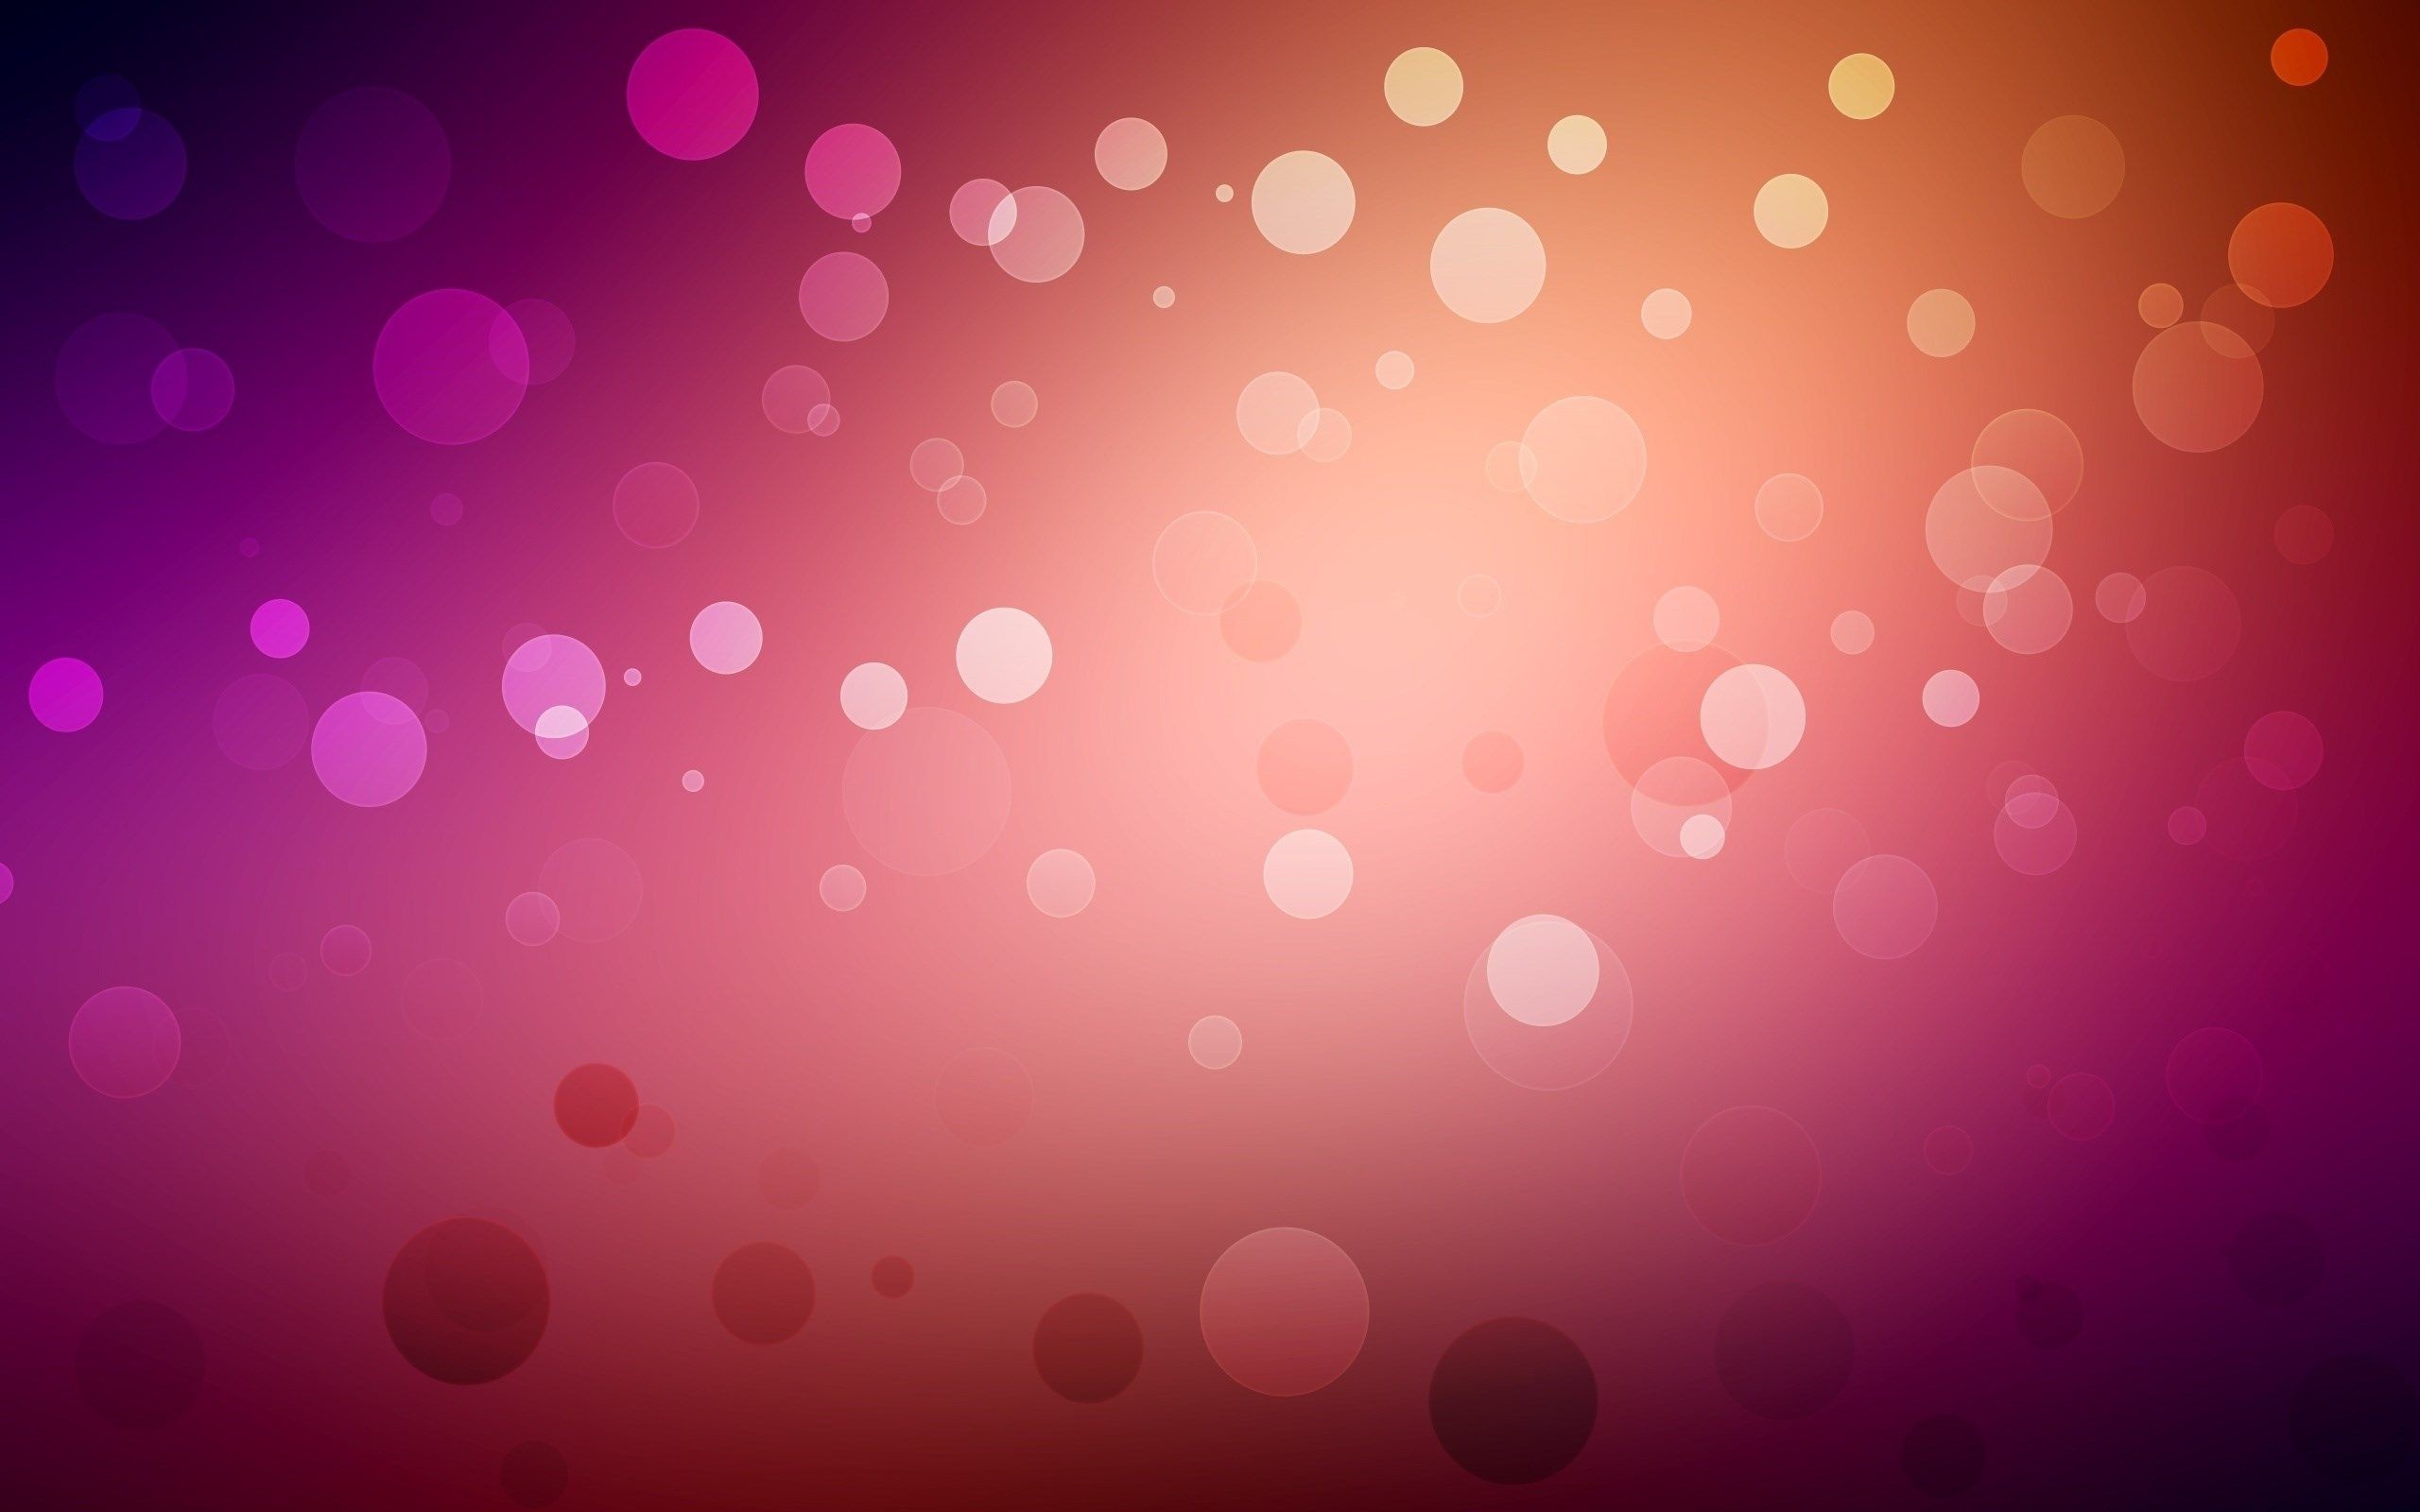 2560x1600, Pink Bubble Hd Wallpapers Data Id 317748 - Pink Bubbles  Background Hd - 2560x1600 Wallpaper 